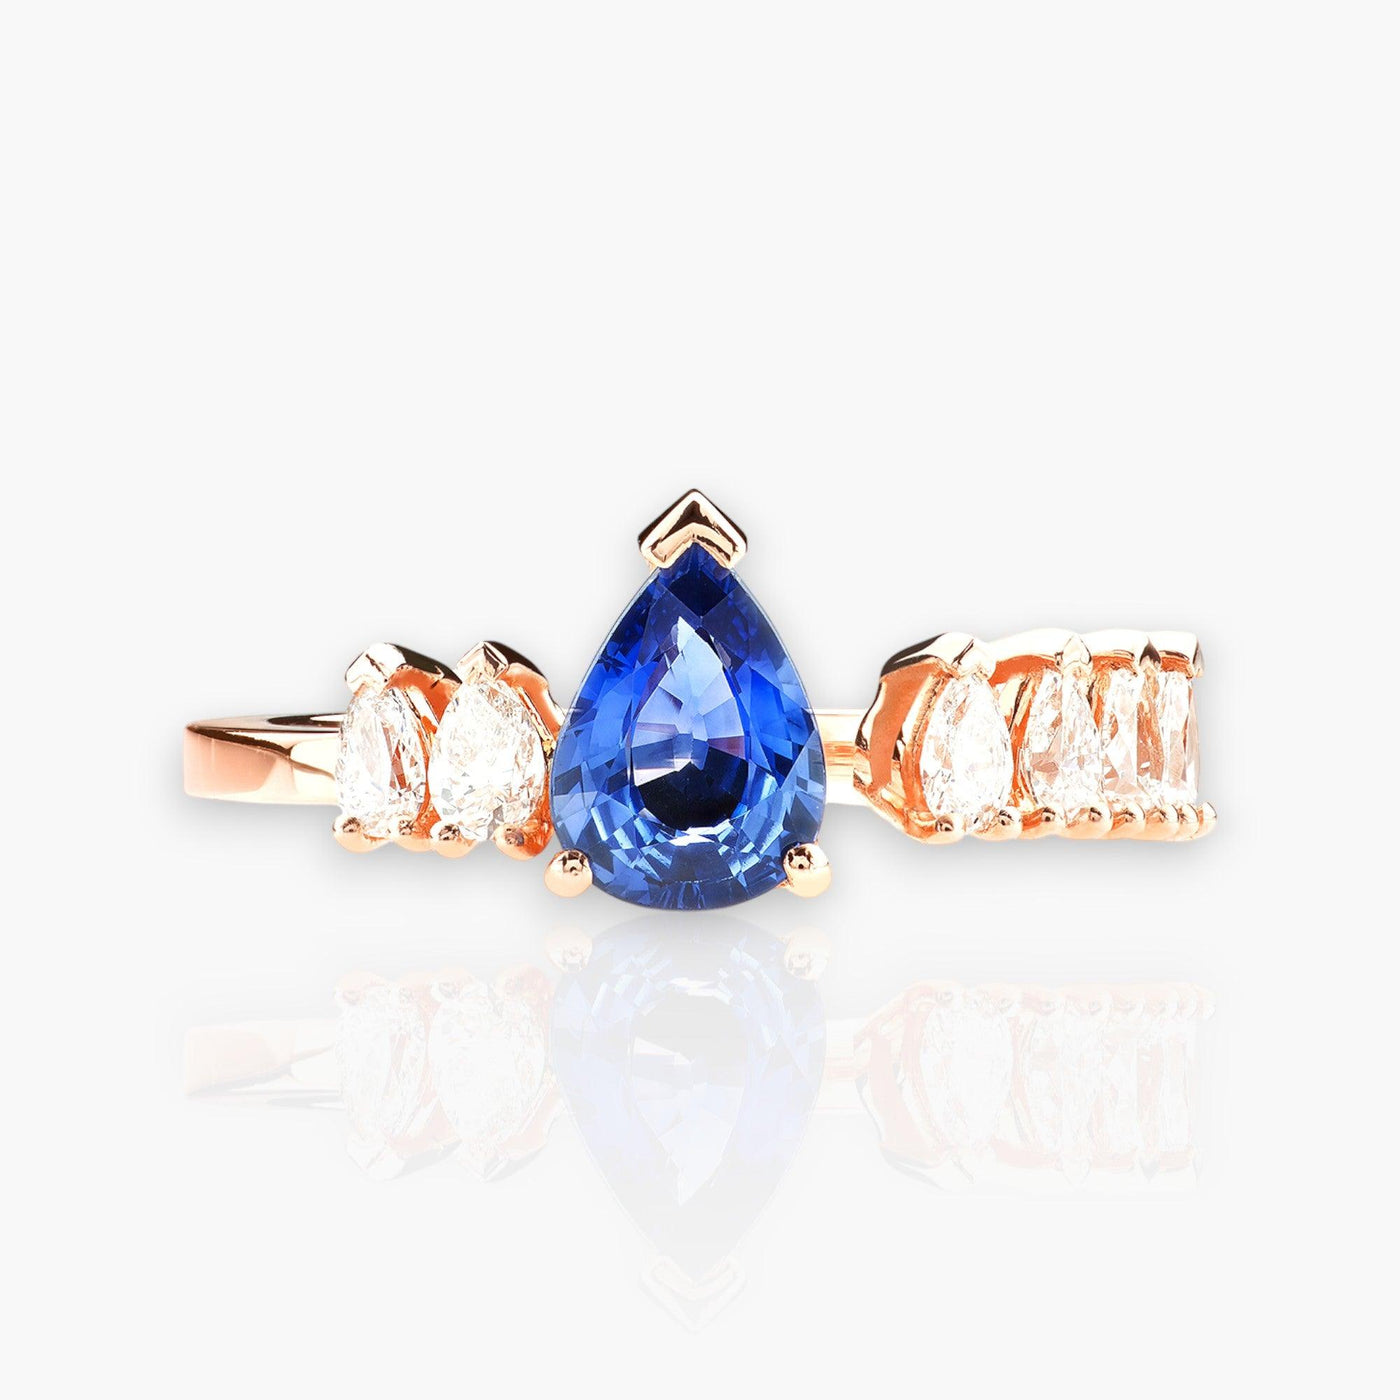 Drop Ring, Rose Gold, Diamonds And Blue Sapphire - Moregola Fine Jewelry